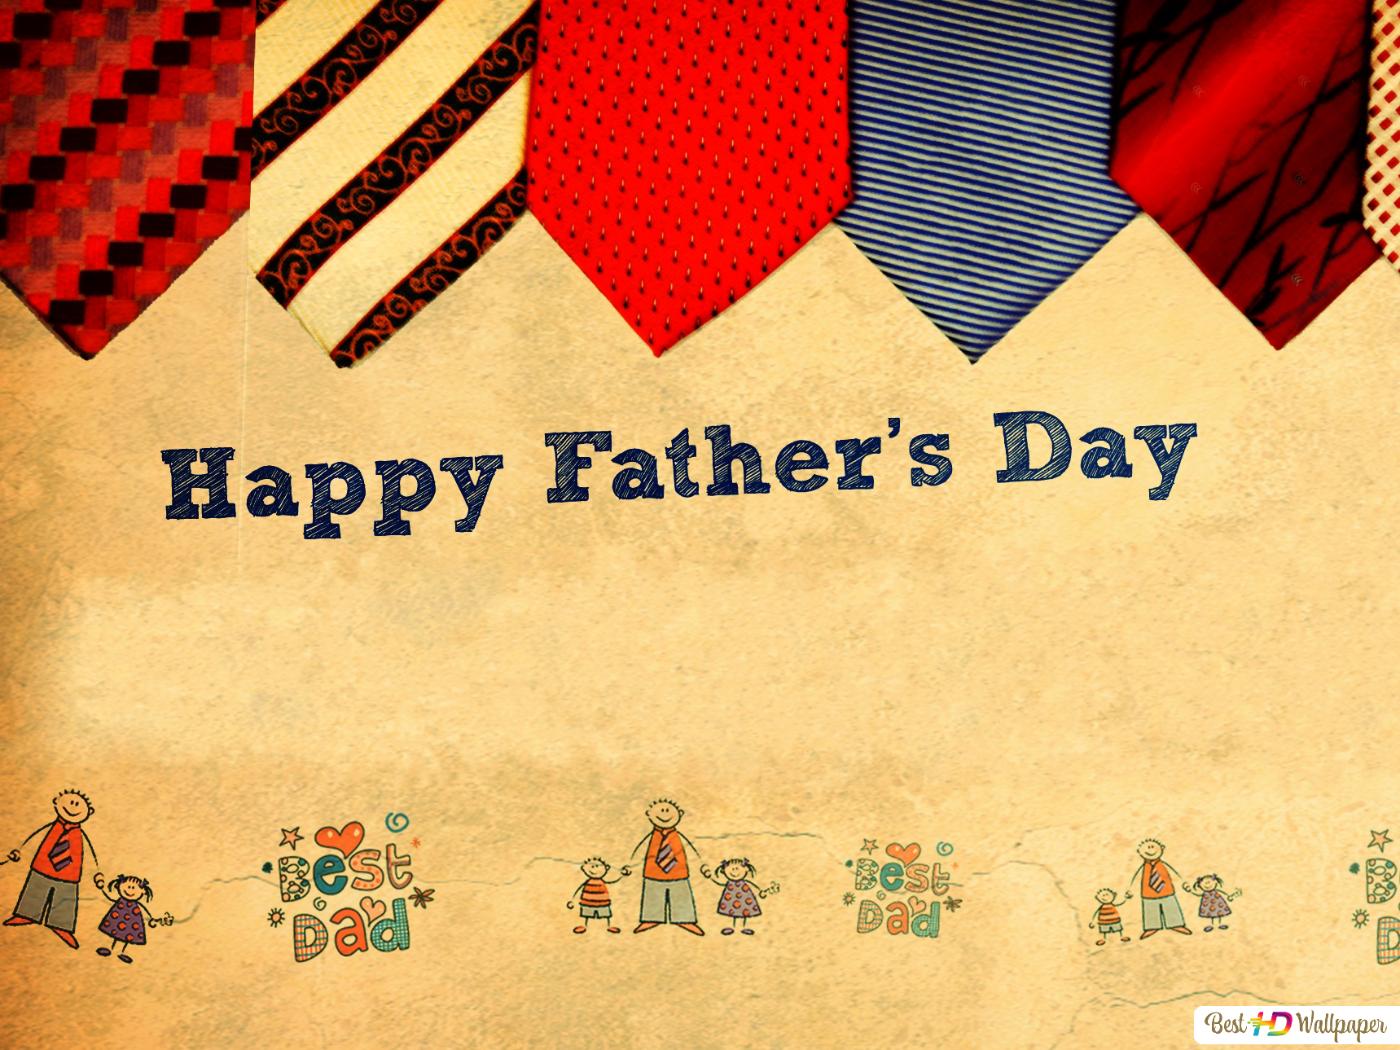 Happy Father's Day Vintage HD wallpaper download's Day wallpaper